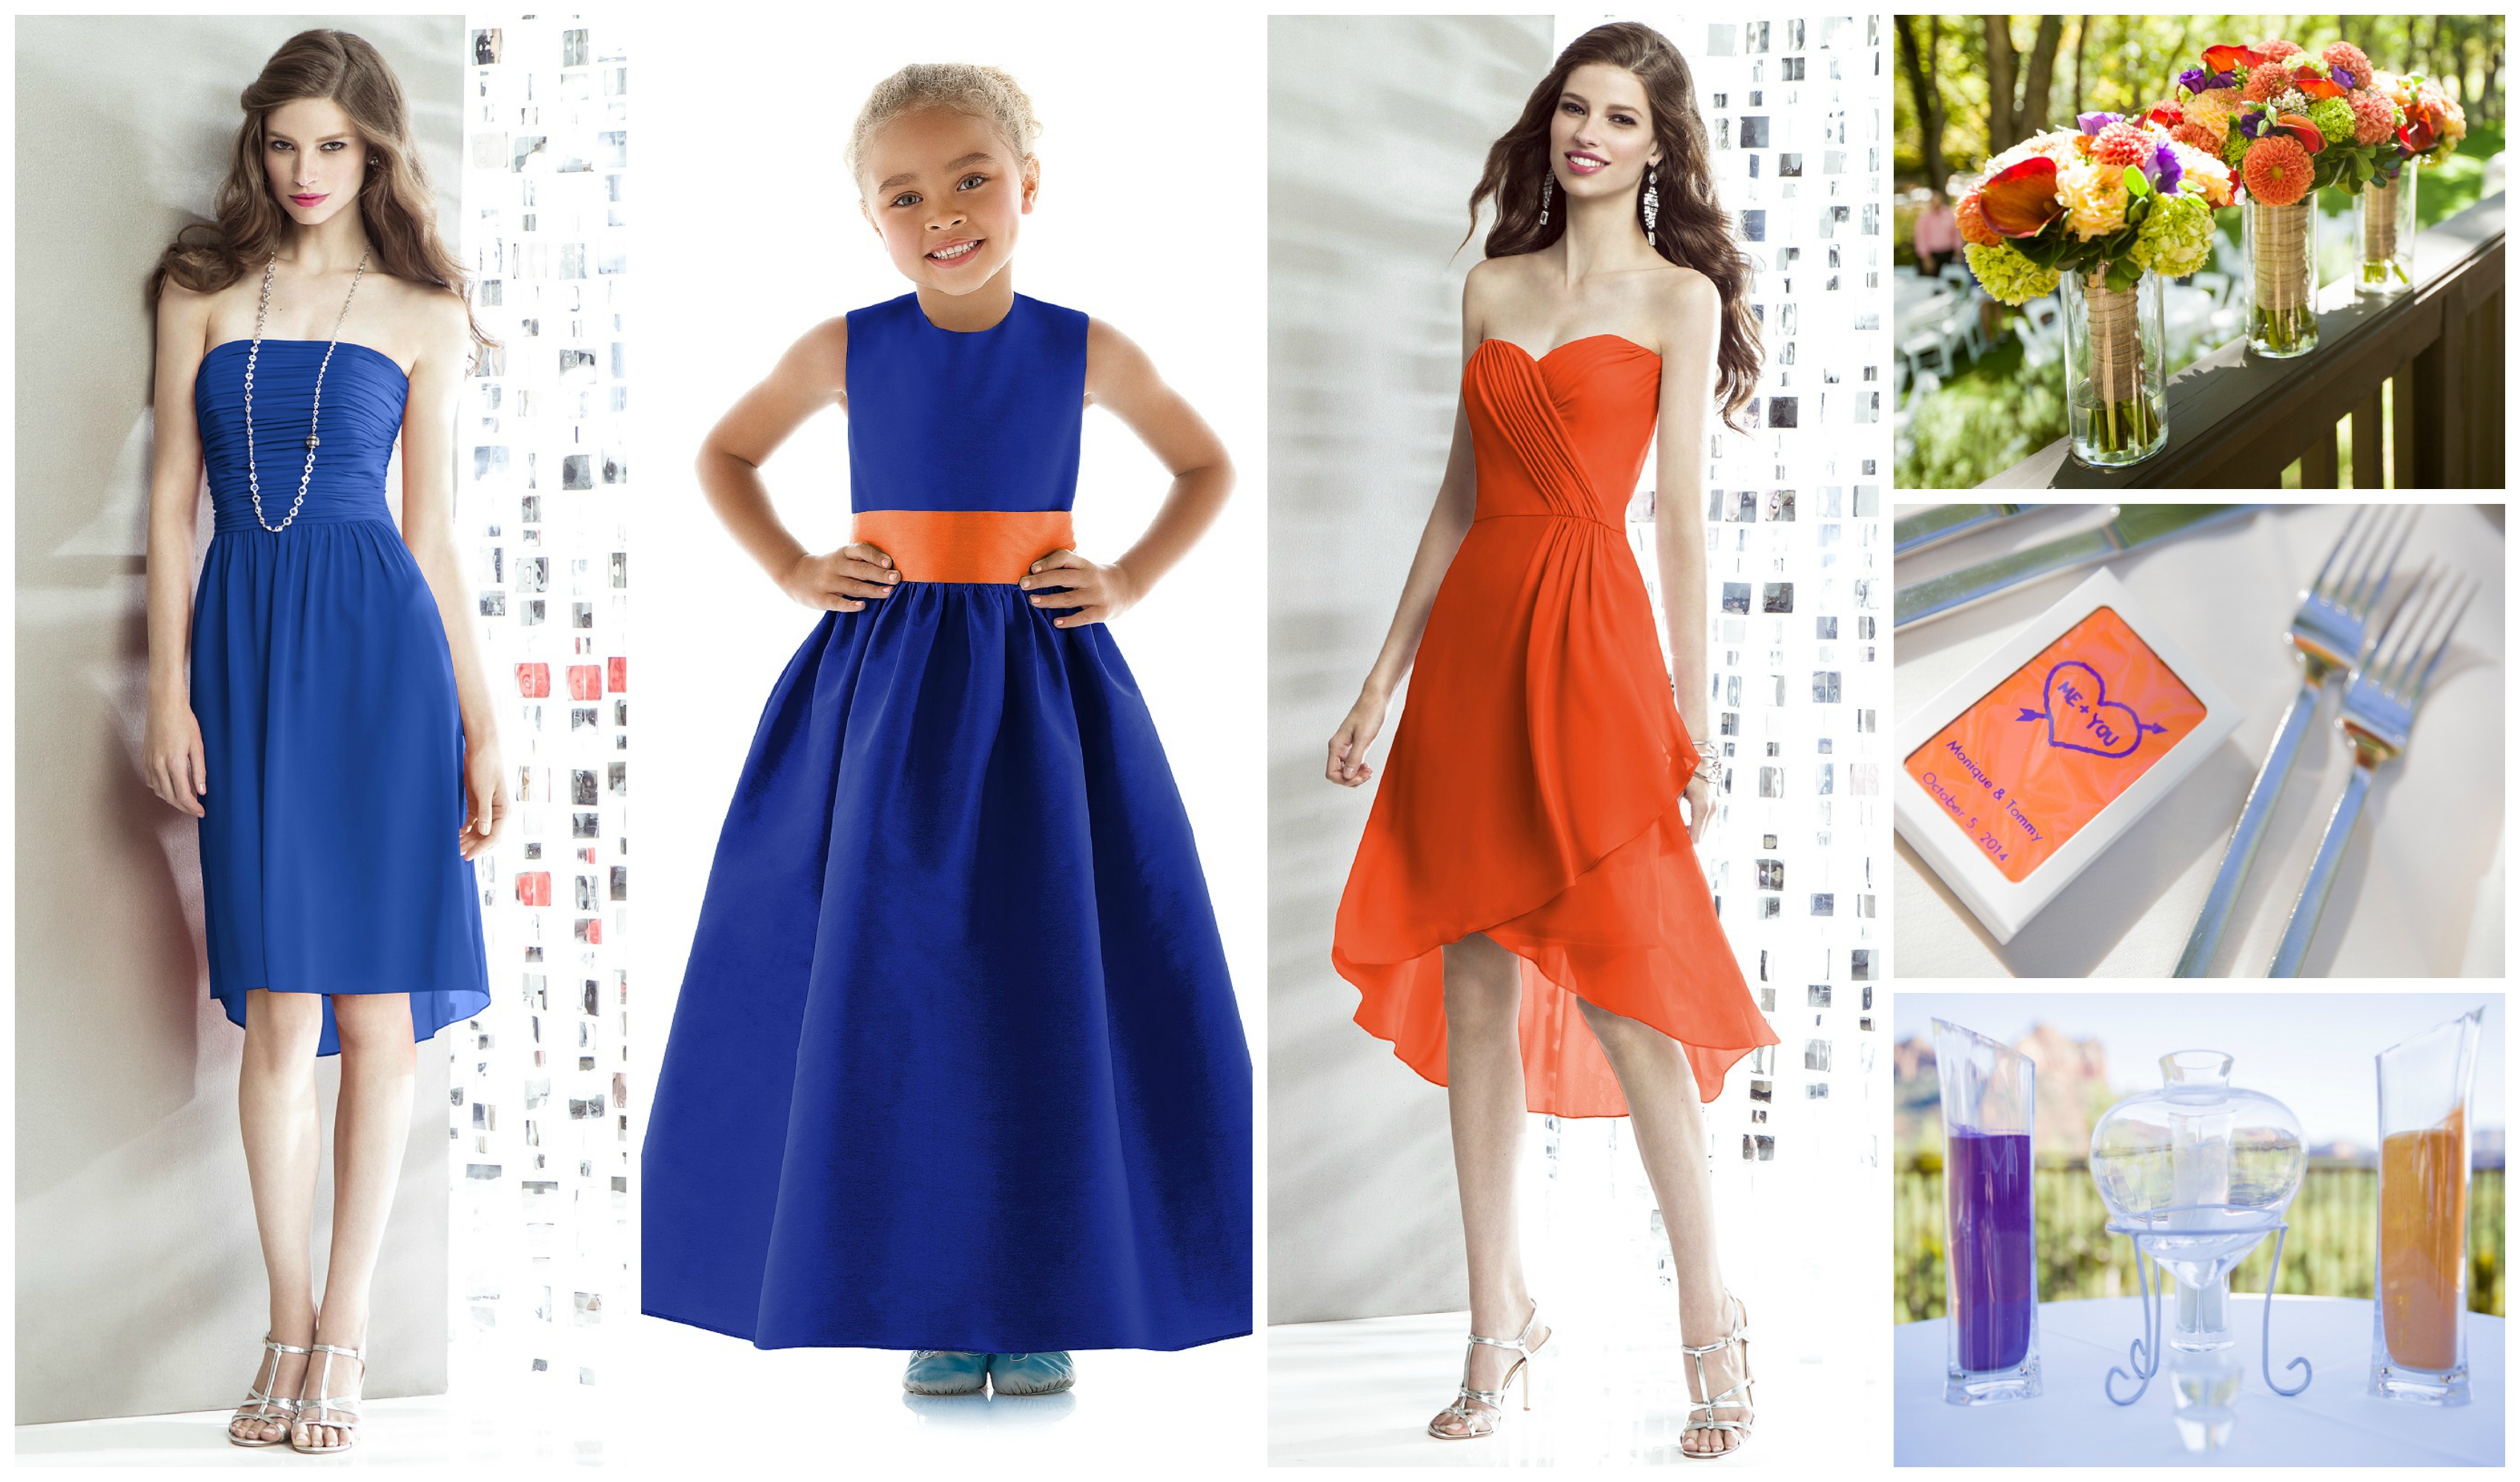 Vibrant Orange and Blue for Your Summer Wedding!